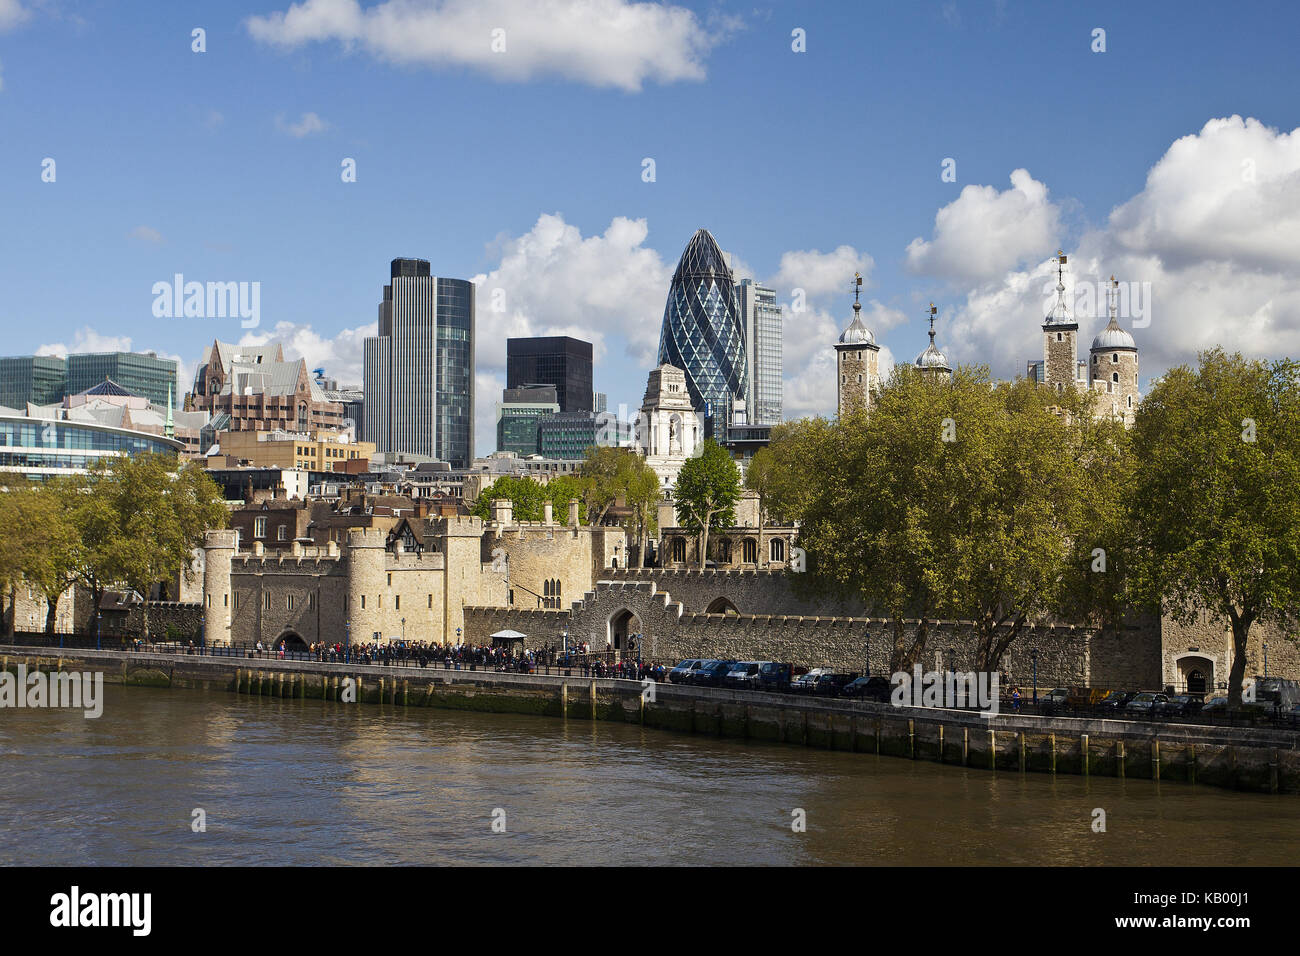 Great Britain, London, bank of River Thames, Tower, townscape, skyline, Stock Photo